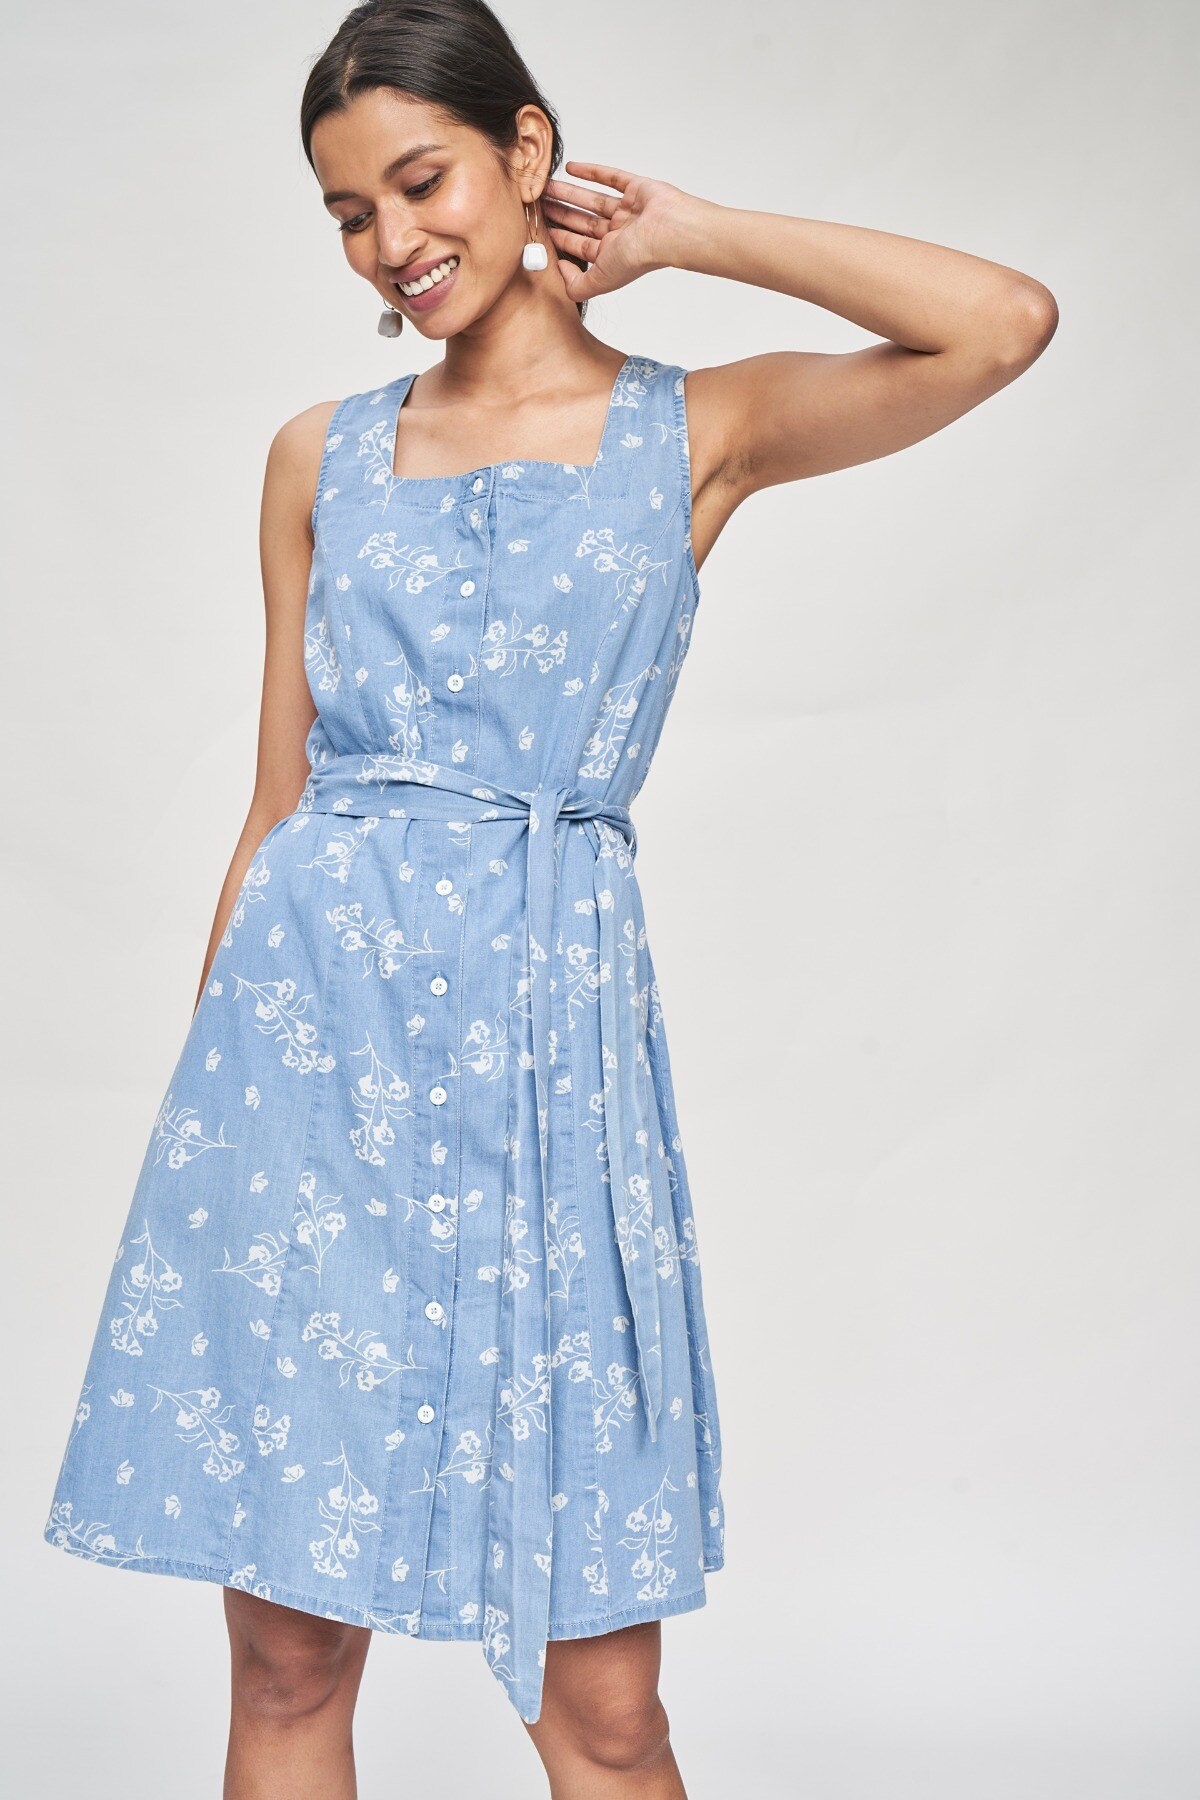 AND | Light Blue Floral Printed A-Line Dress